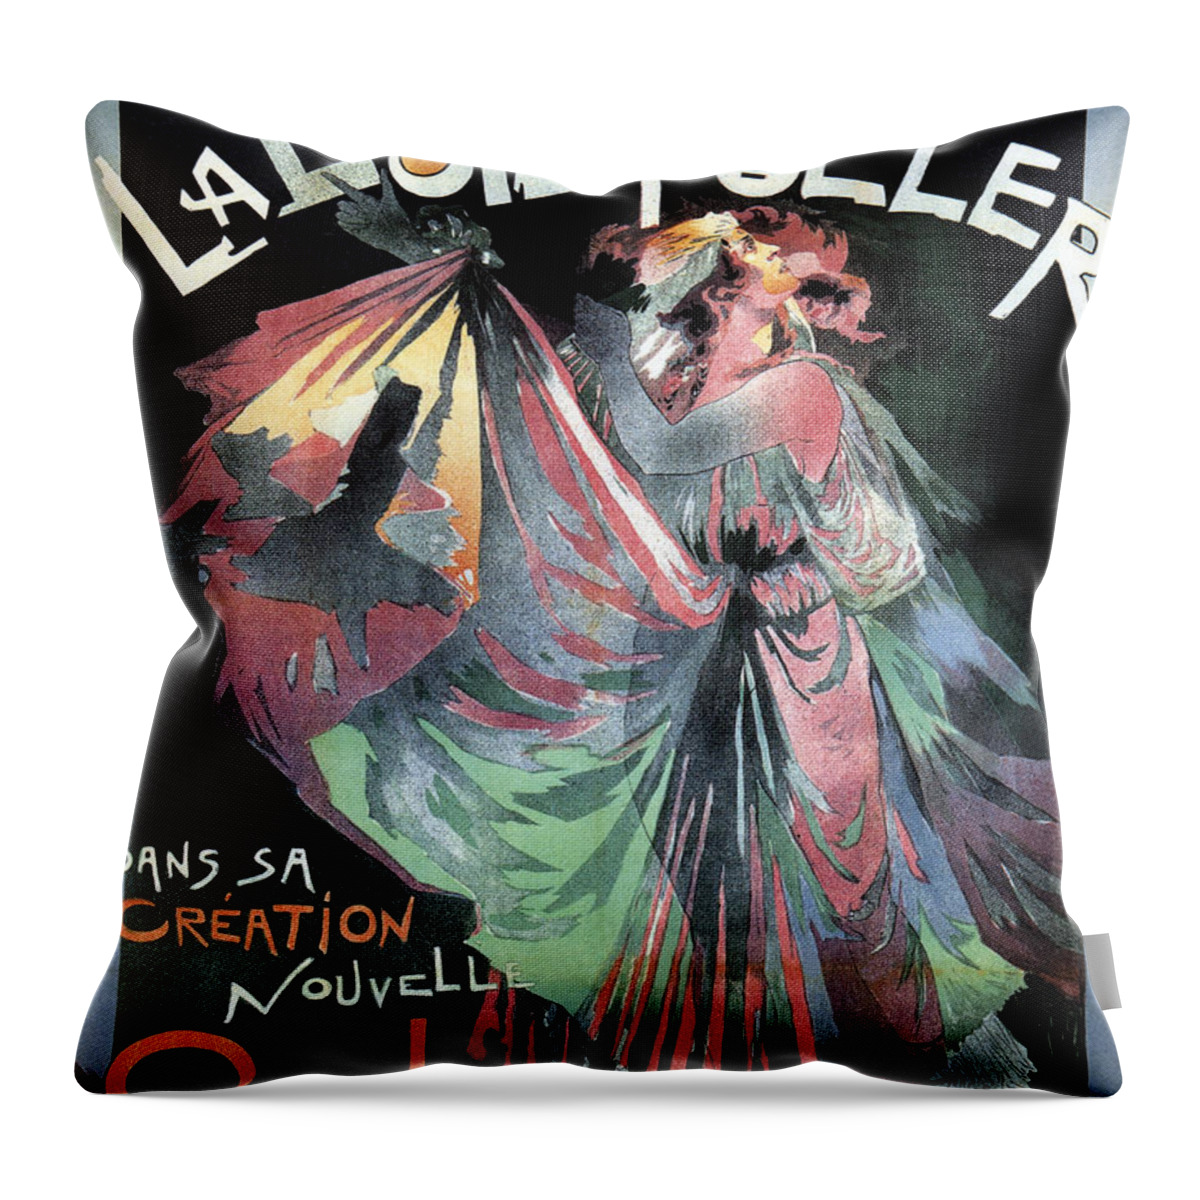 La Loie Fuller Salome Throw Pillow featuring the mixed media La Loie Fuller Salome - Evolutionised Dance by Using Gas Lighting - Vintage Advertising Poster by Studio Grafiikka